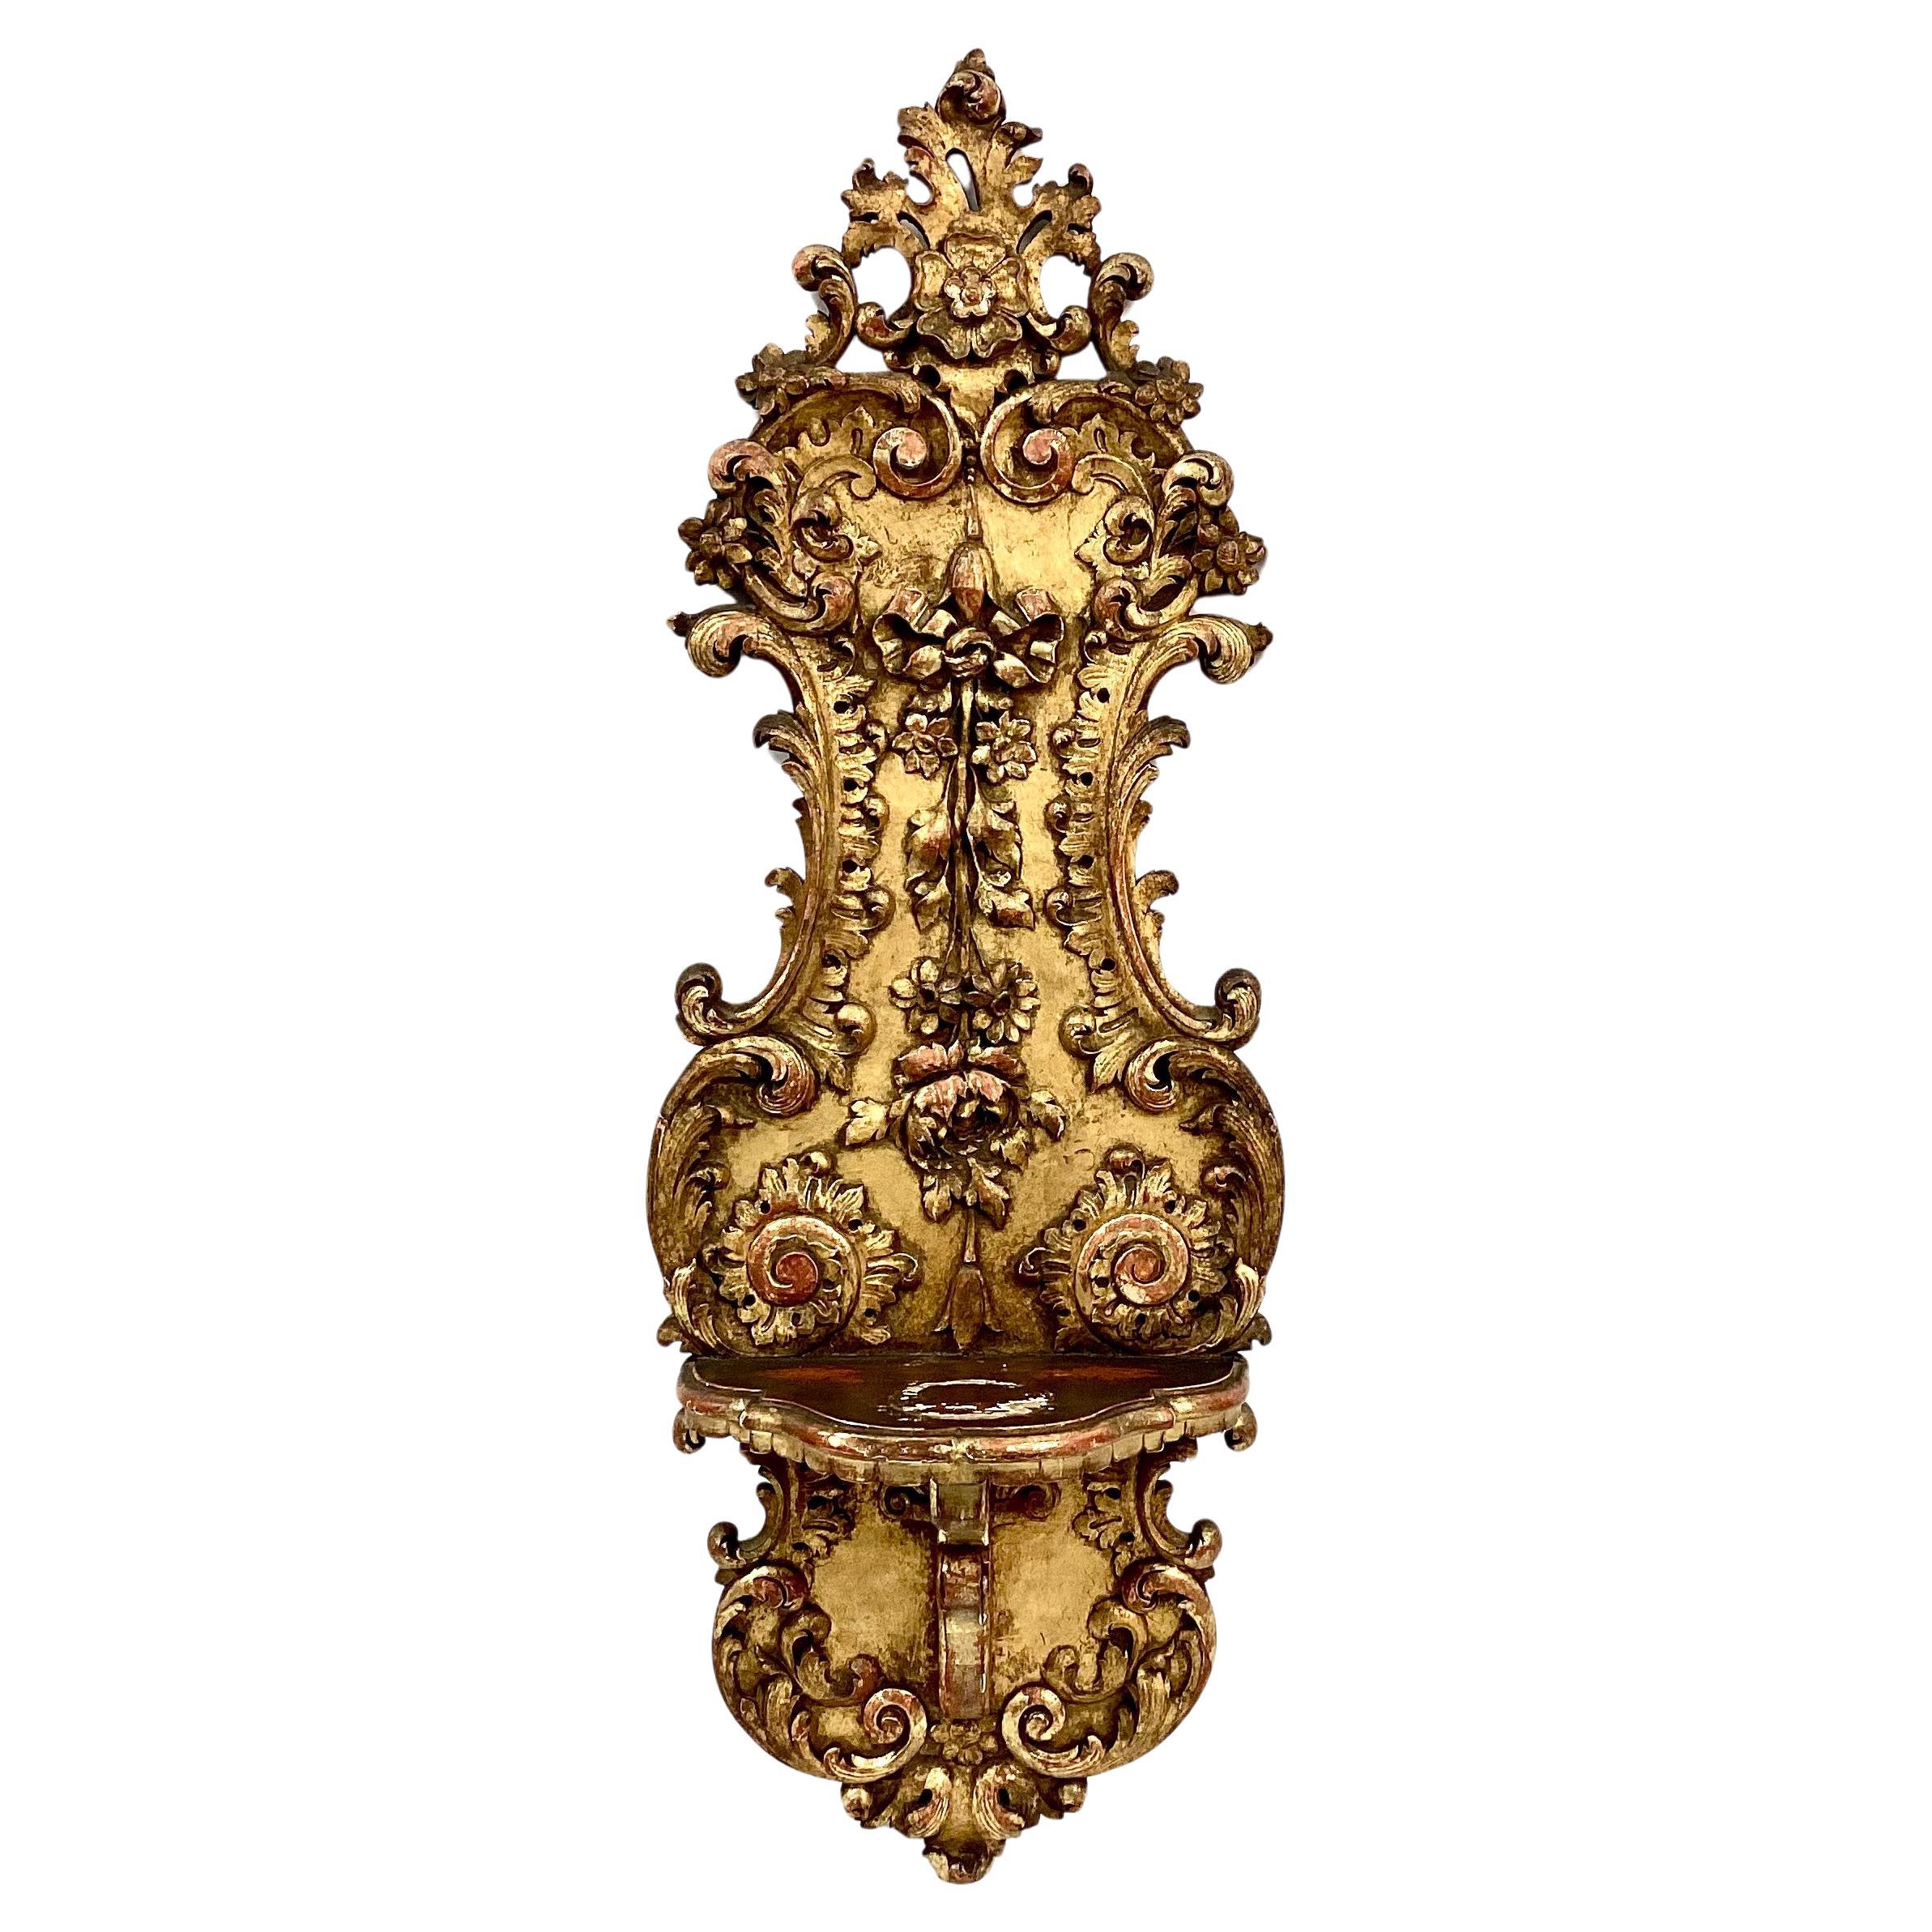 Unique pair of tall giltwood 19th century French wall brackets. Ornate scrolling, ribbons and floral motif throughout. Six inch shelf on each for displaying vases, candles, or other small items. Hanger in place on back. Wonderful, aged patina.